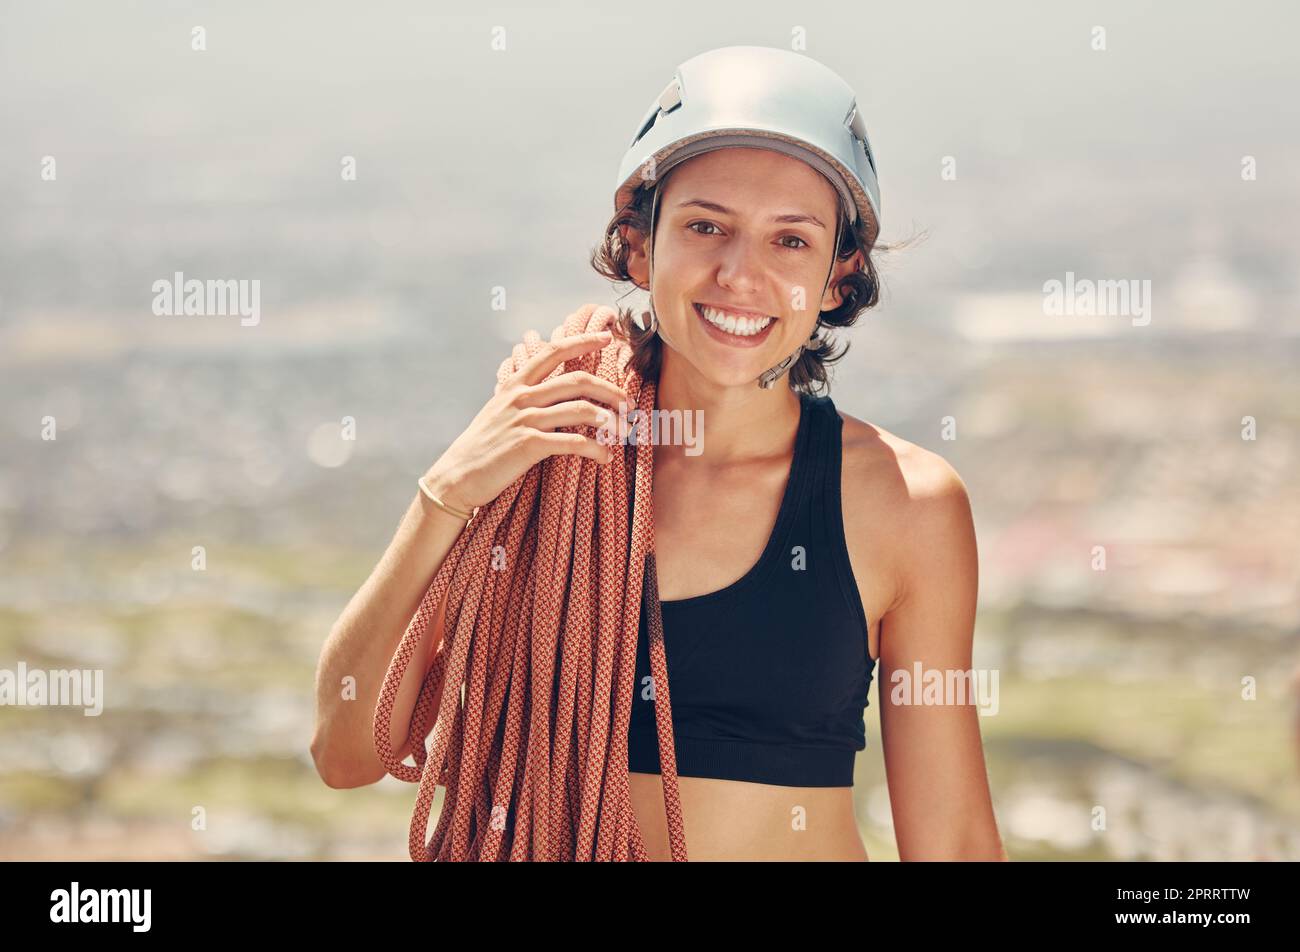 Sports woman, helmet and ropes for mountain or rock climbing and hiking adventure outdoors. Exercise, fitness and extreme climber with a smile feeling adrenaline and motivated for extreme sport Stock Photo